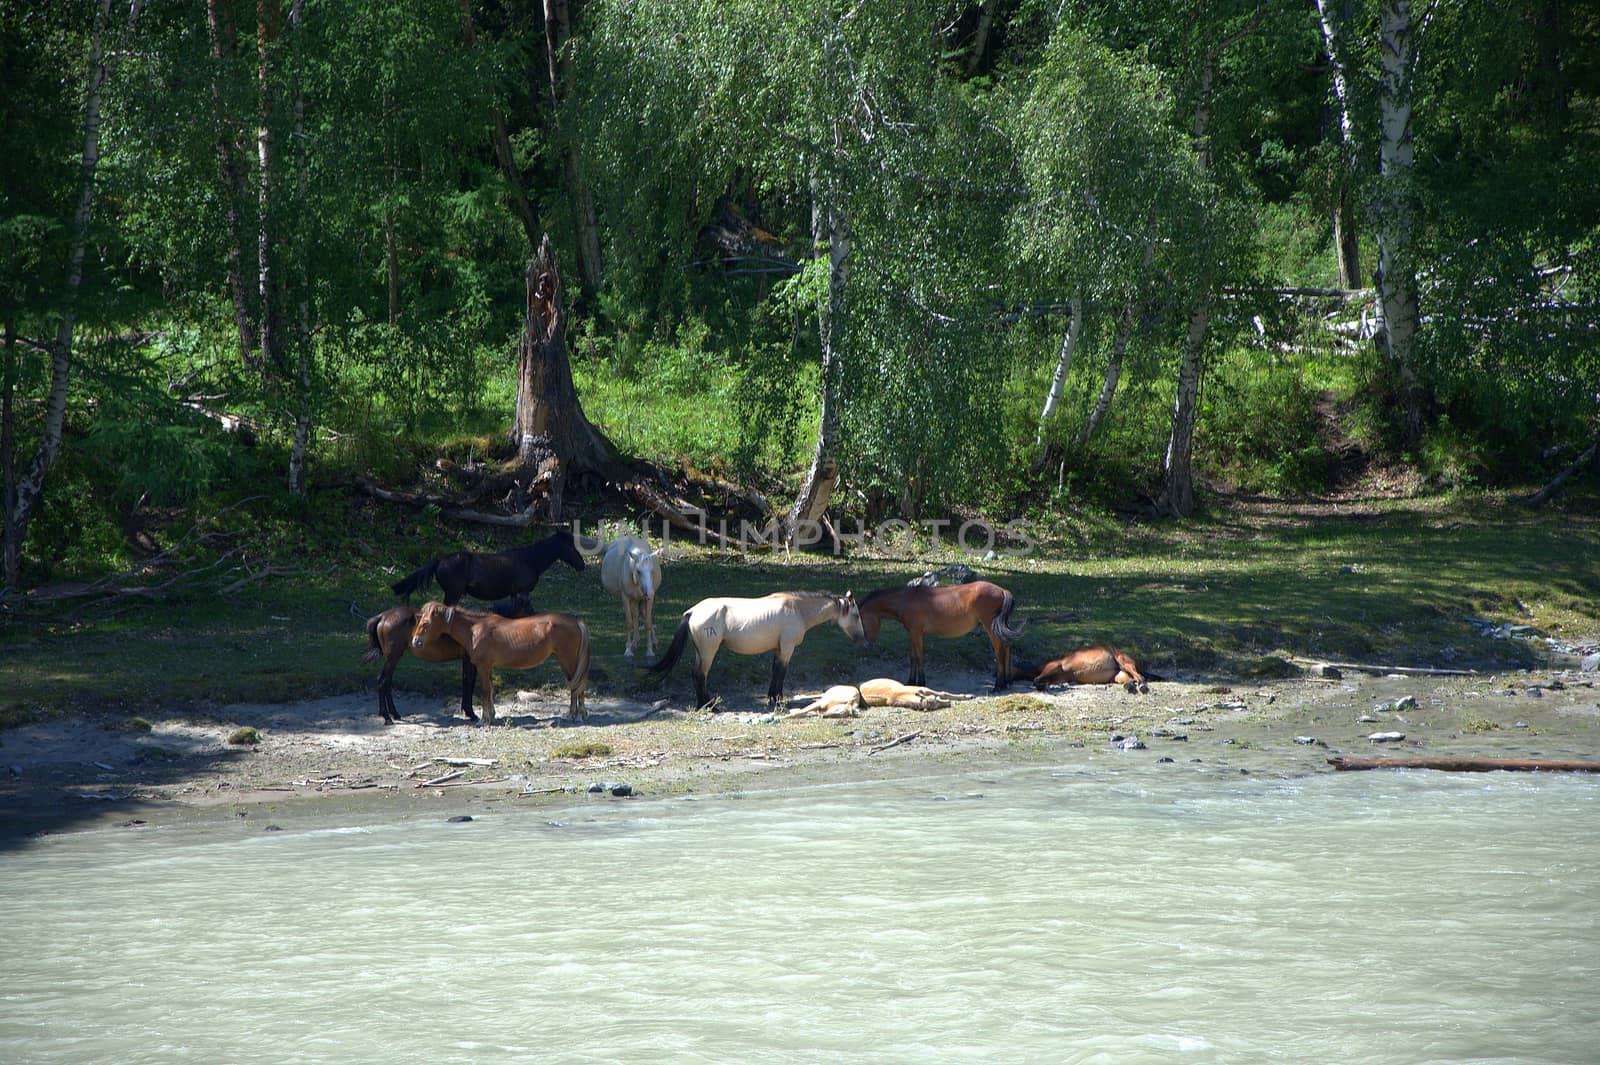 A small herd of horses resting in the shade of trees on the banks of a mountain river. Altai, Siberia, Russia. Landscape. by alexey_zheltukhin